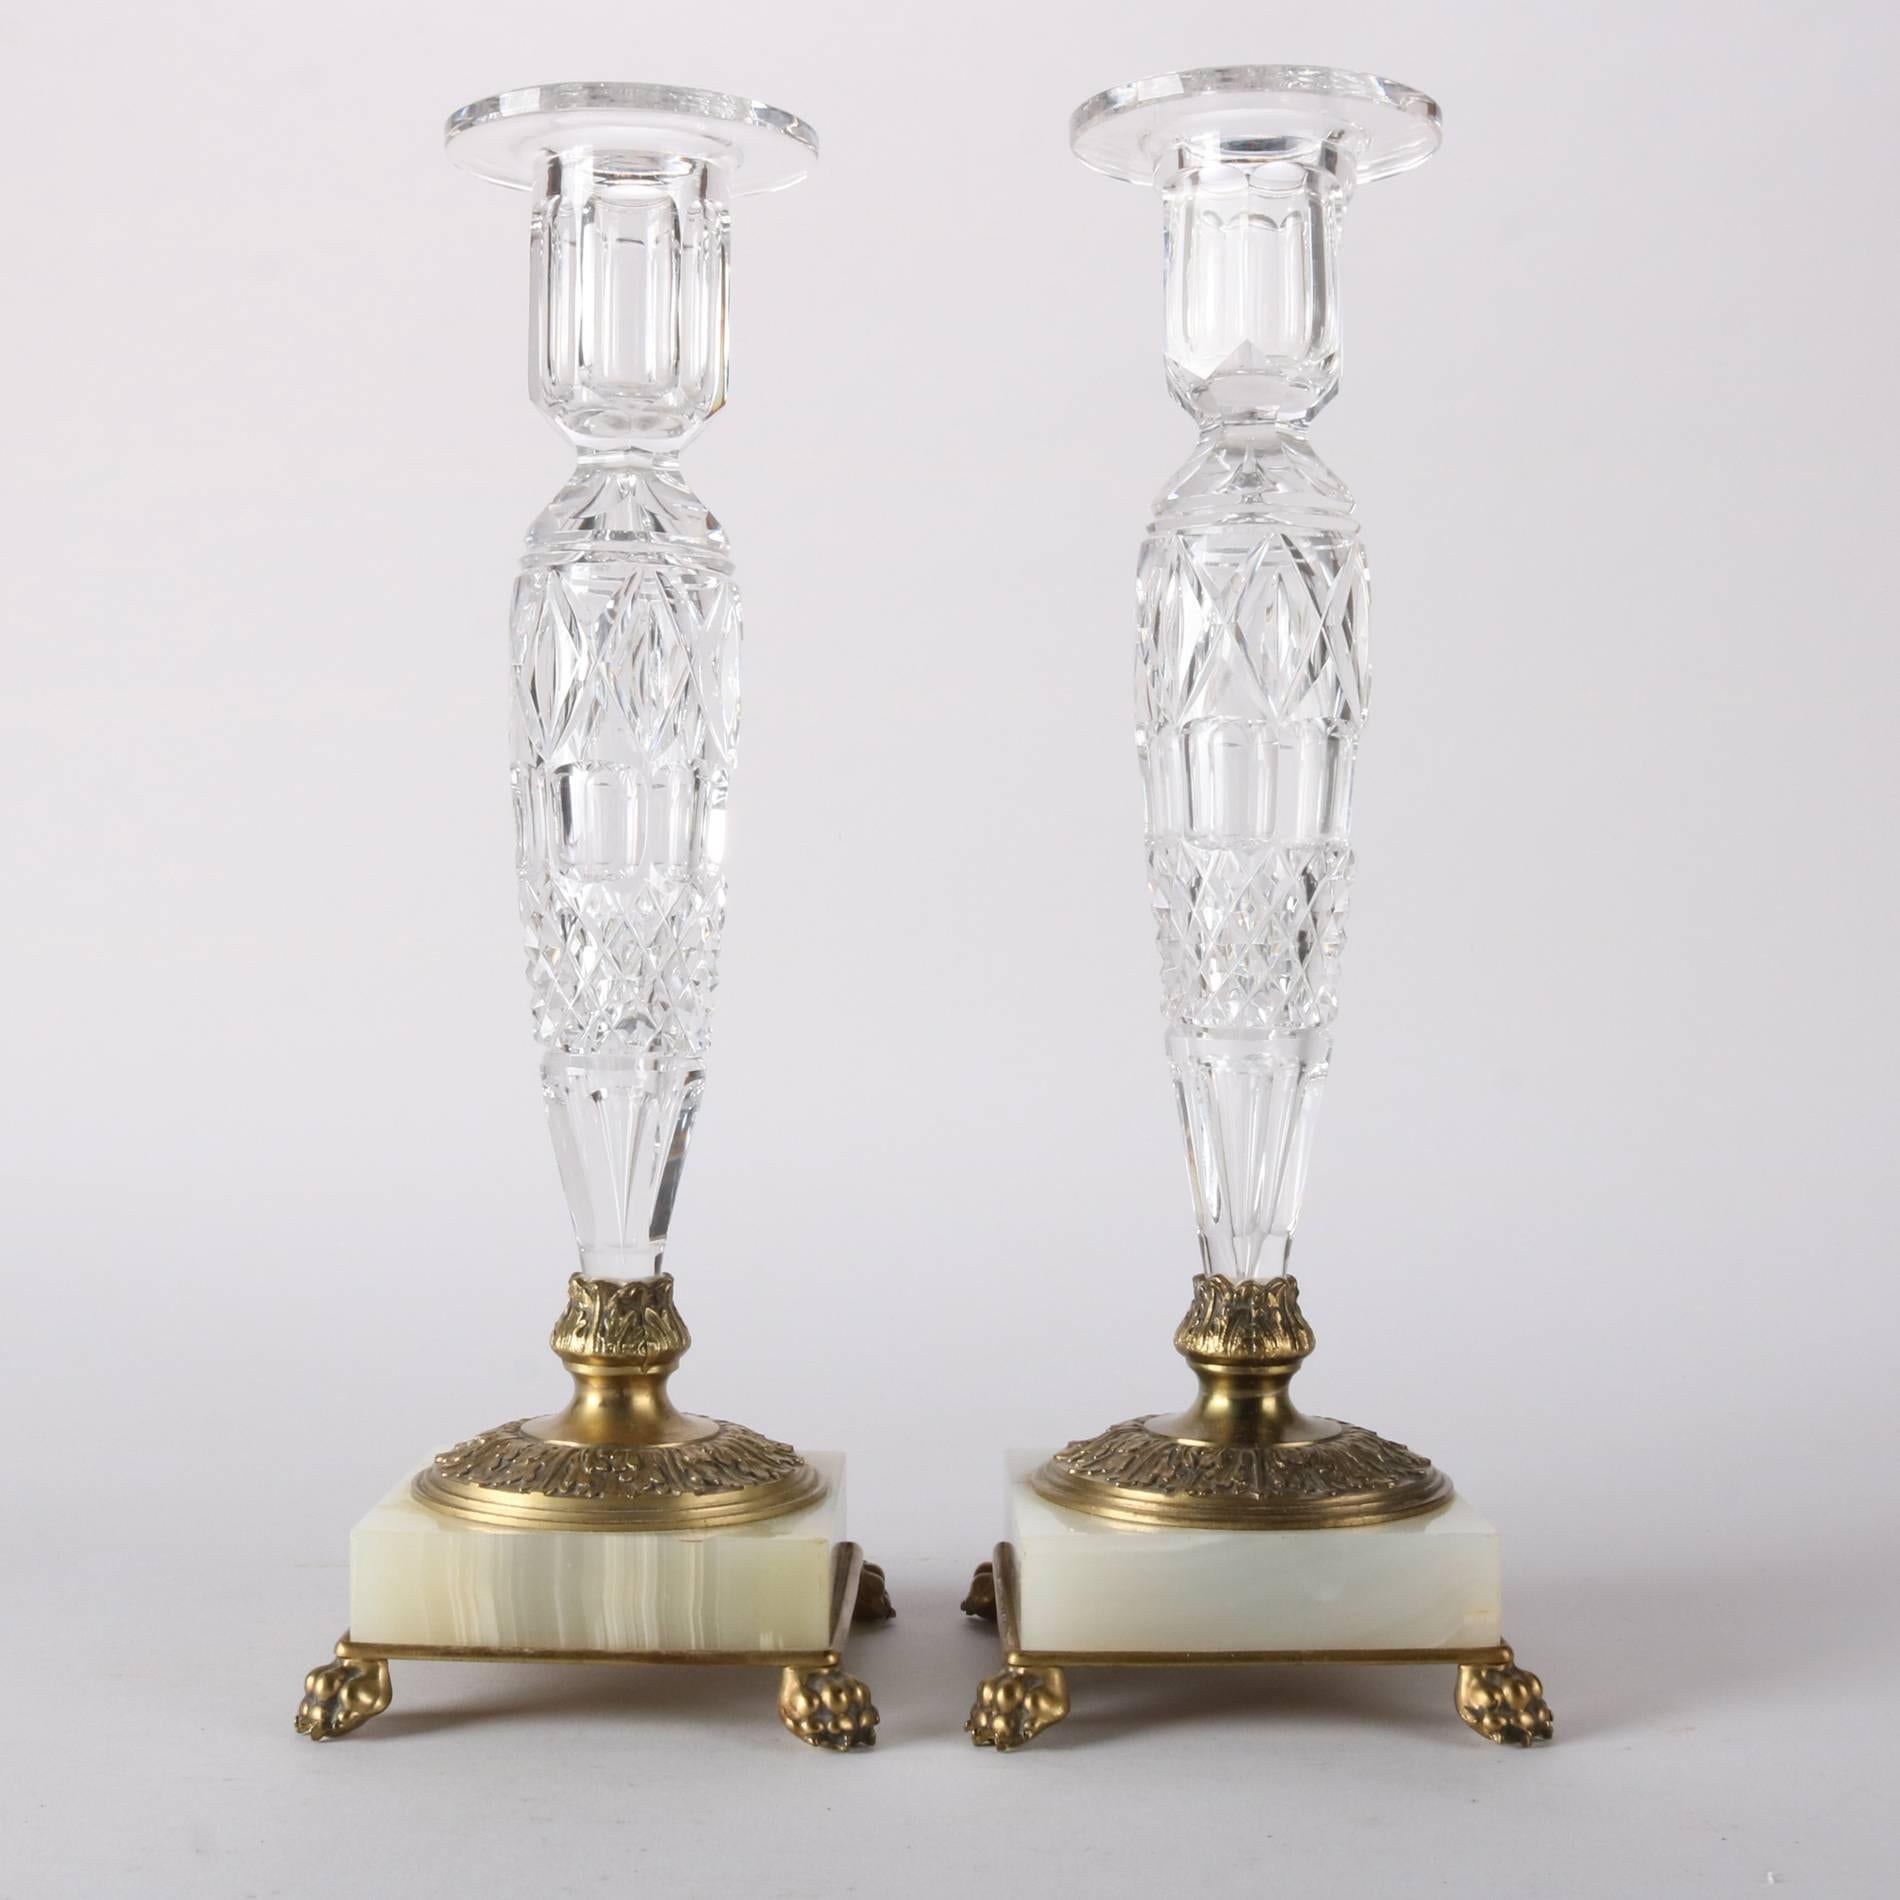 Pair of Antique Pairpoint Cut Crystal, Onyx and Brass Footed Candle Sticks 1